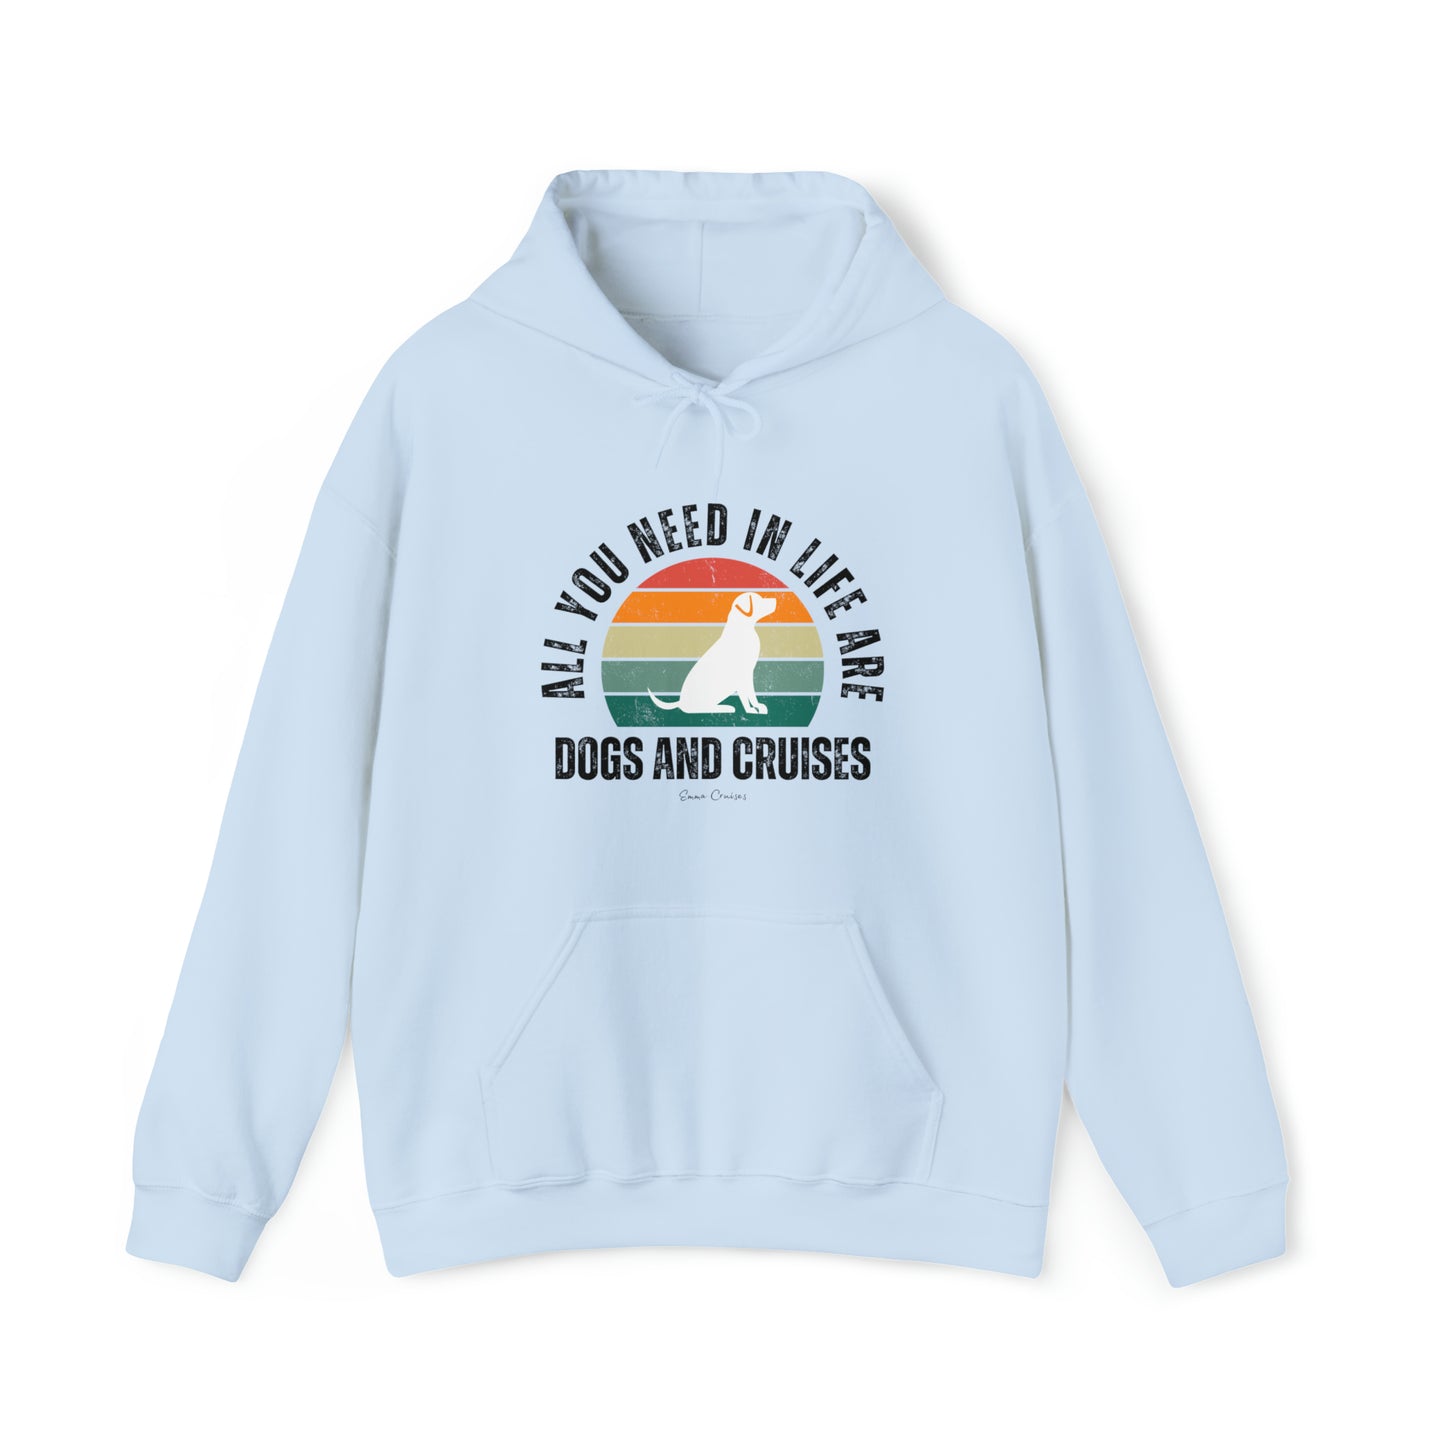 Dogs and Cruises - UNISEX Hoodie